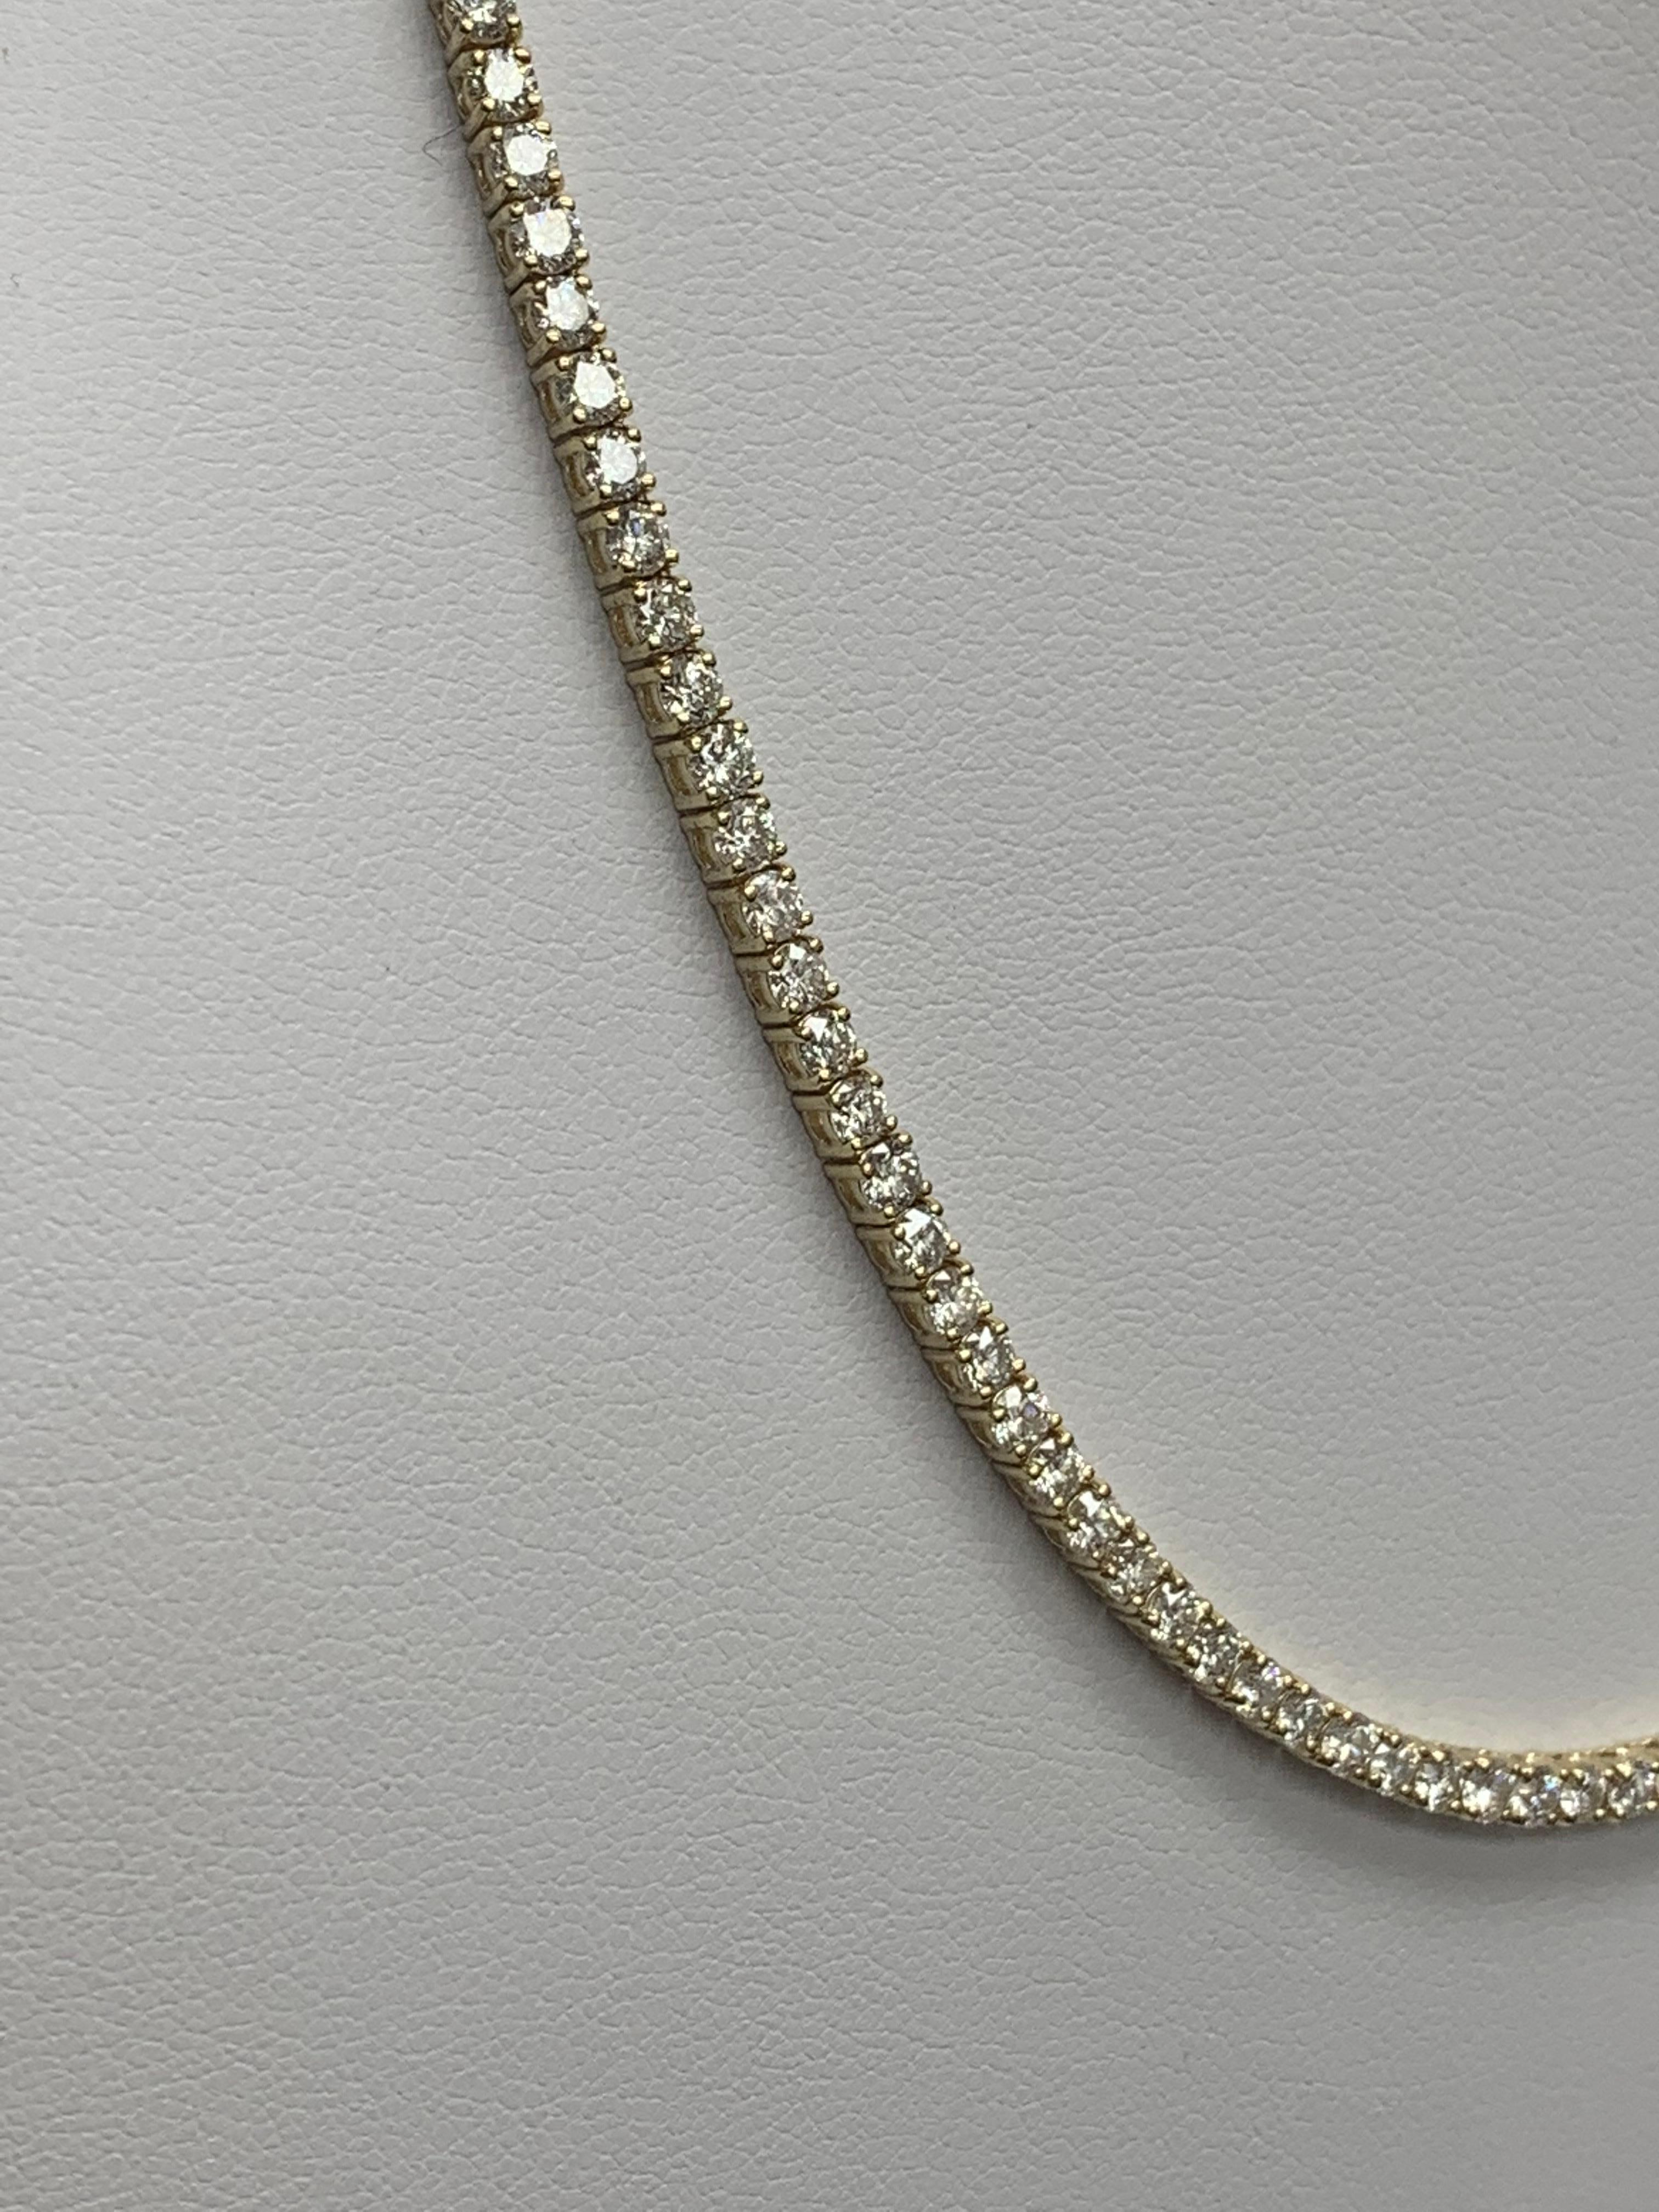 Brilliant Cut 11.31 Carat Diamond Tennis Necklace in 14K Yellow Gold For Sale